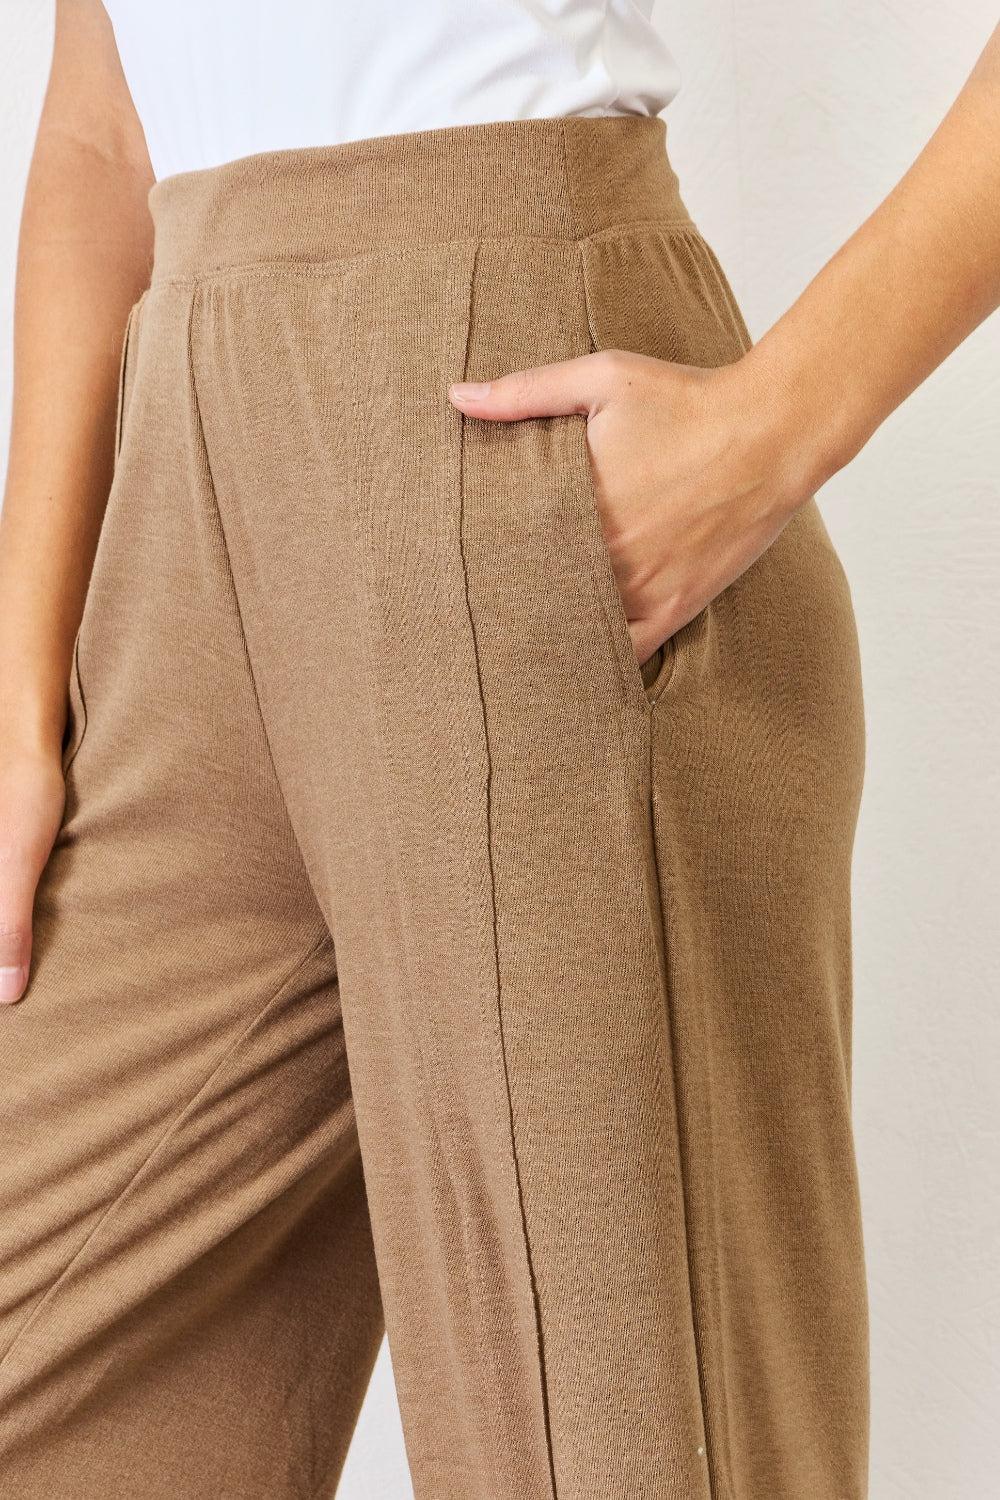 a close up of a person wearing a pair of pants